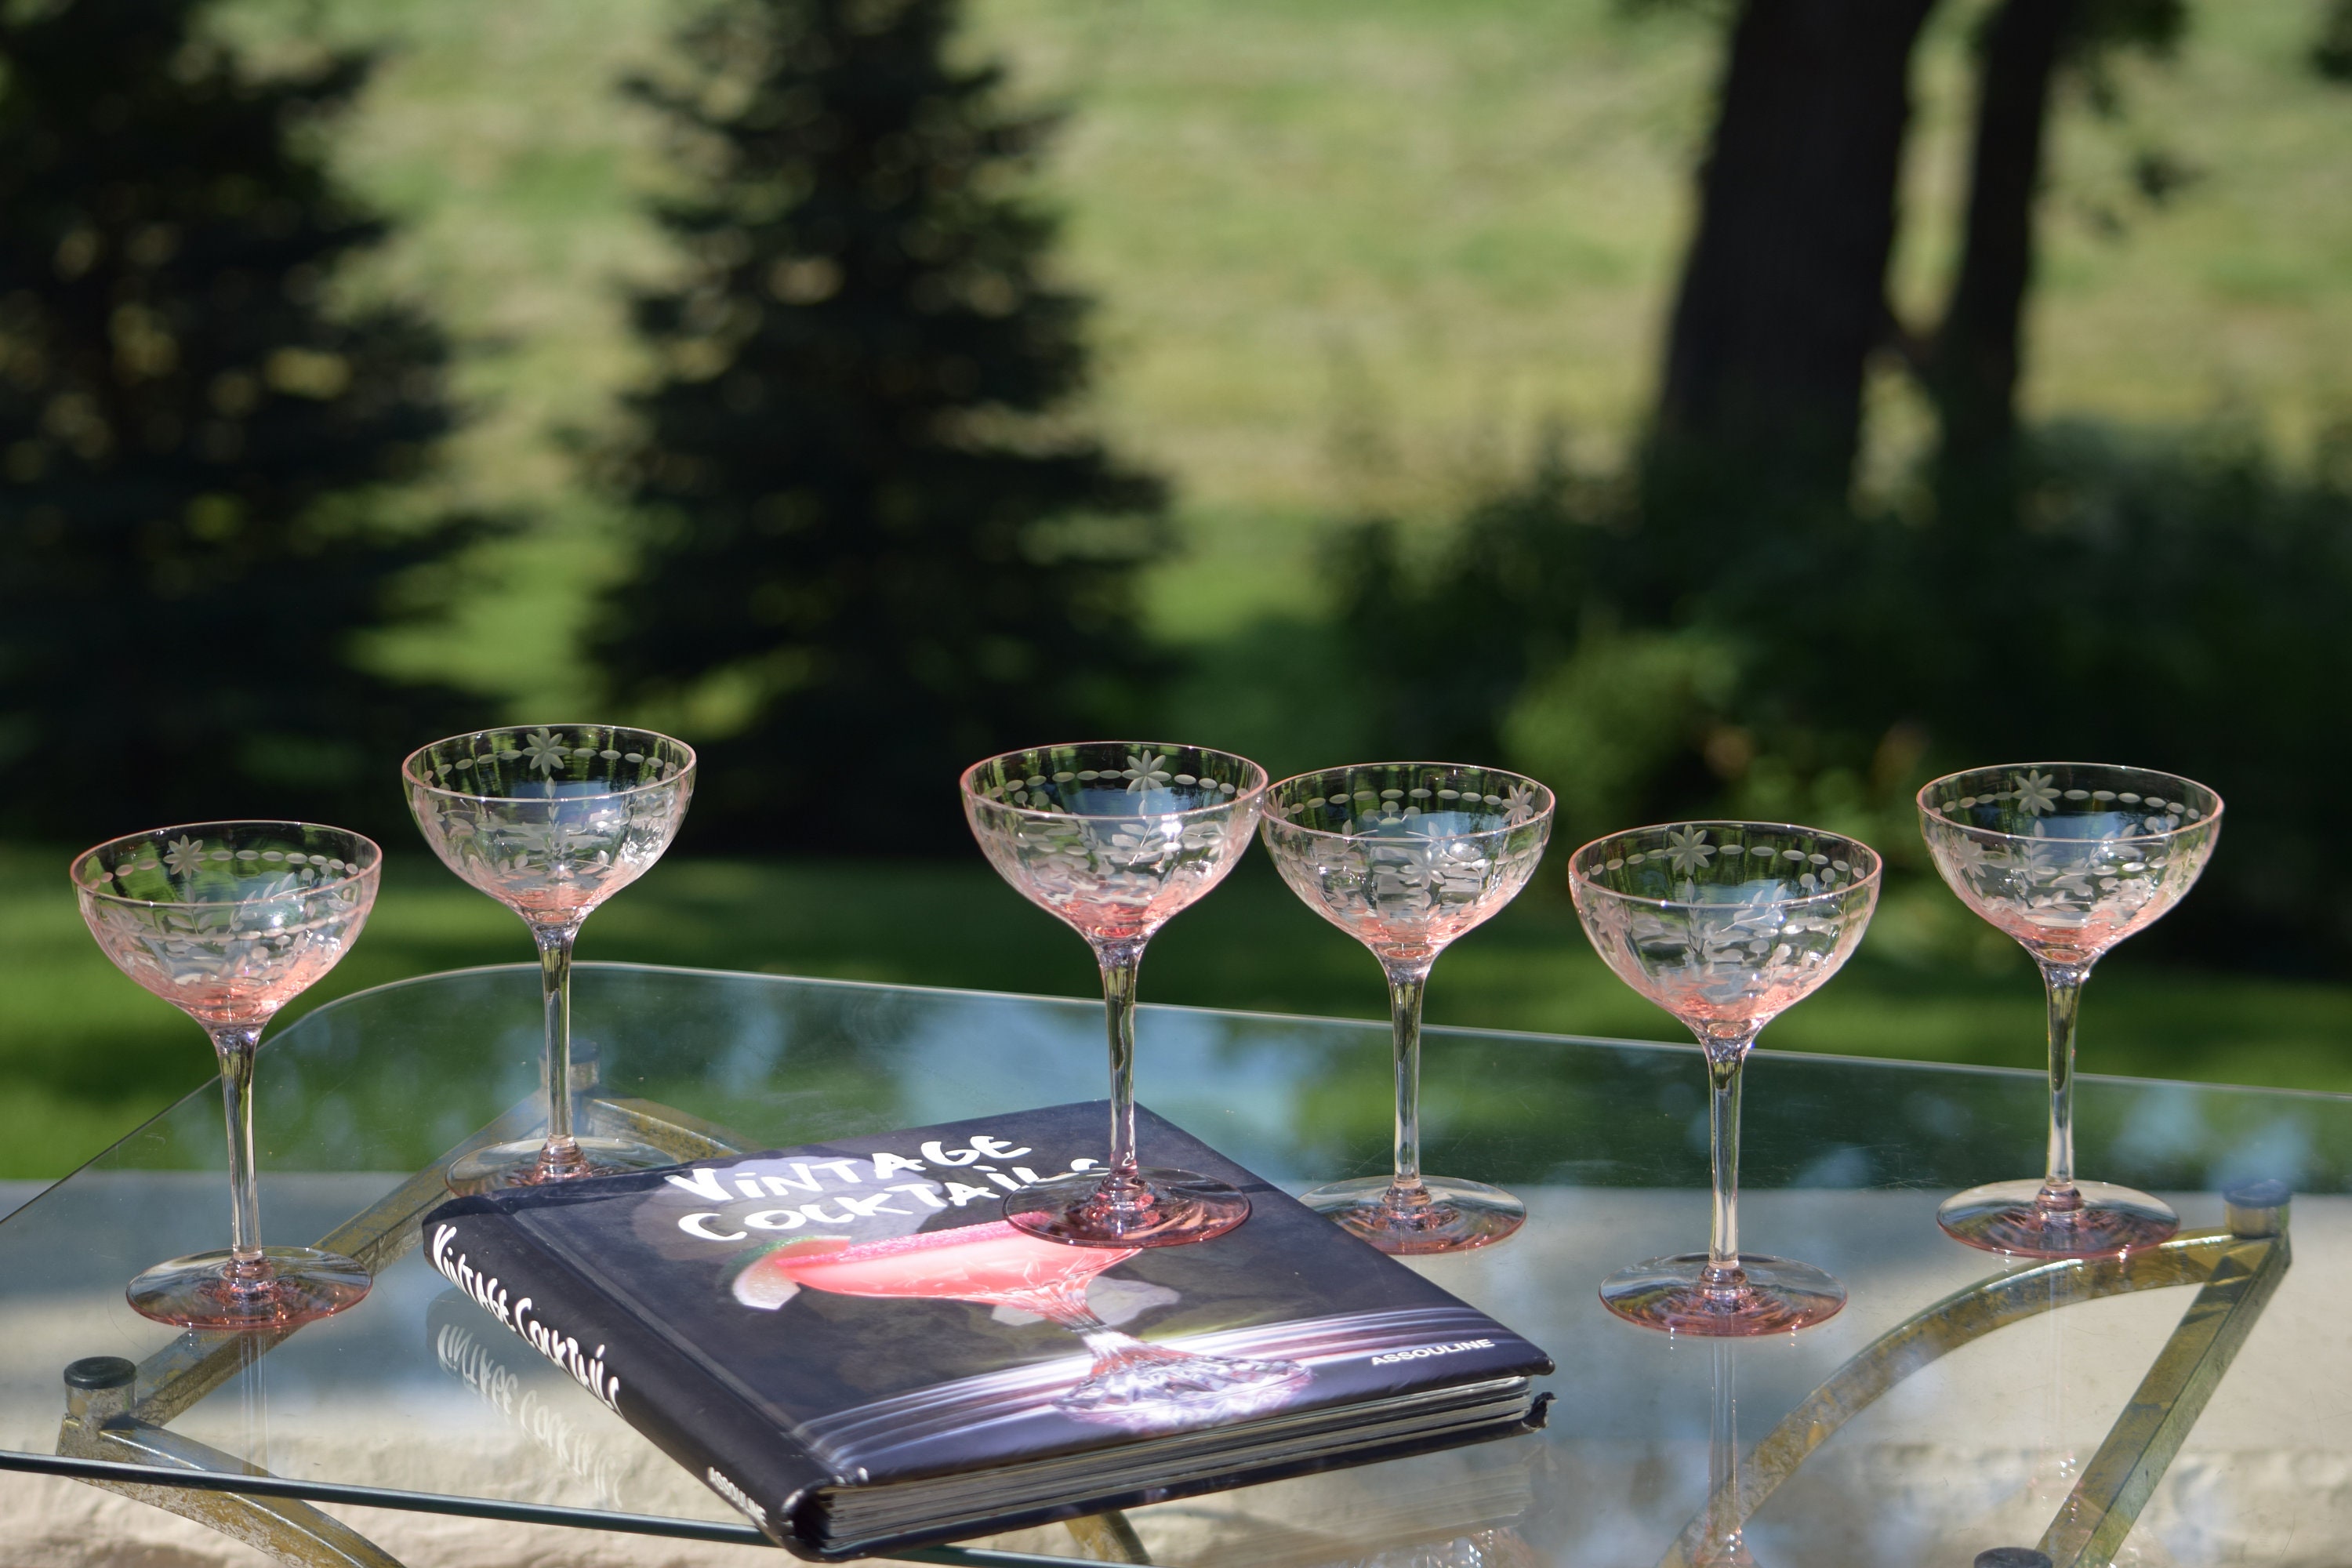 4 Vintage Cocktail Coupes - Glasses Pink Stems, 4 oz Small